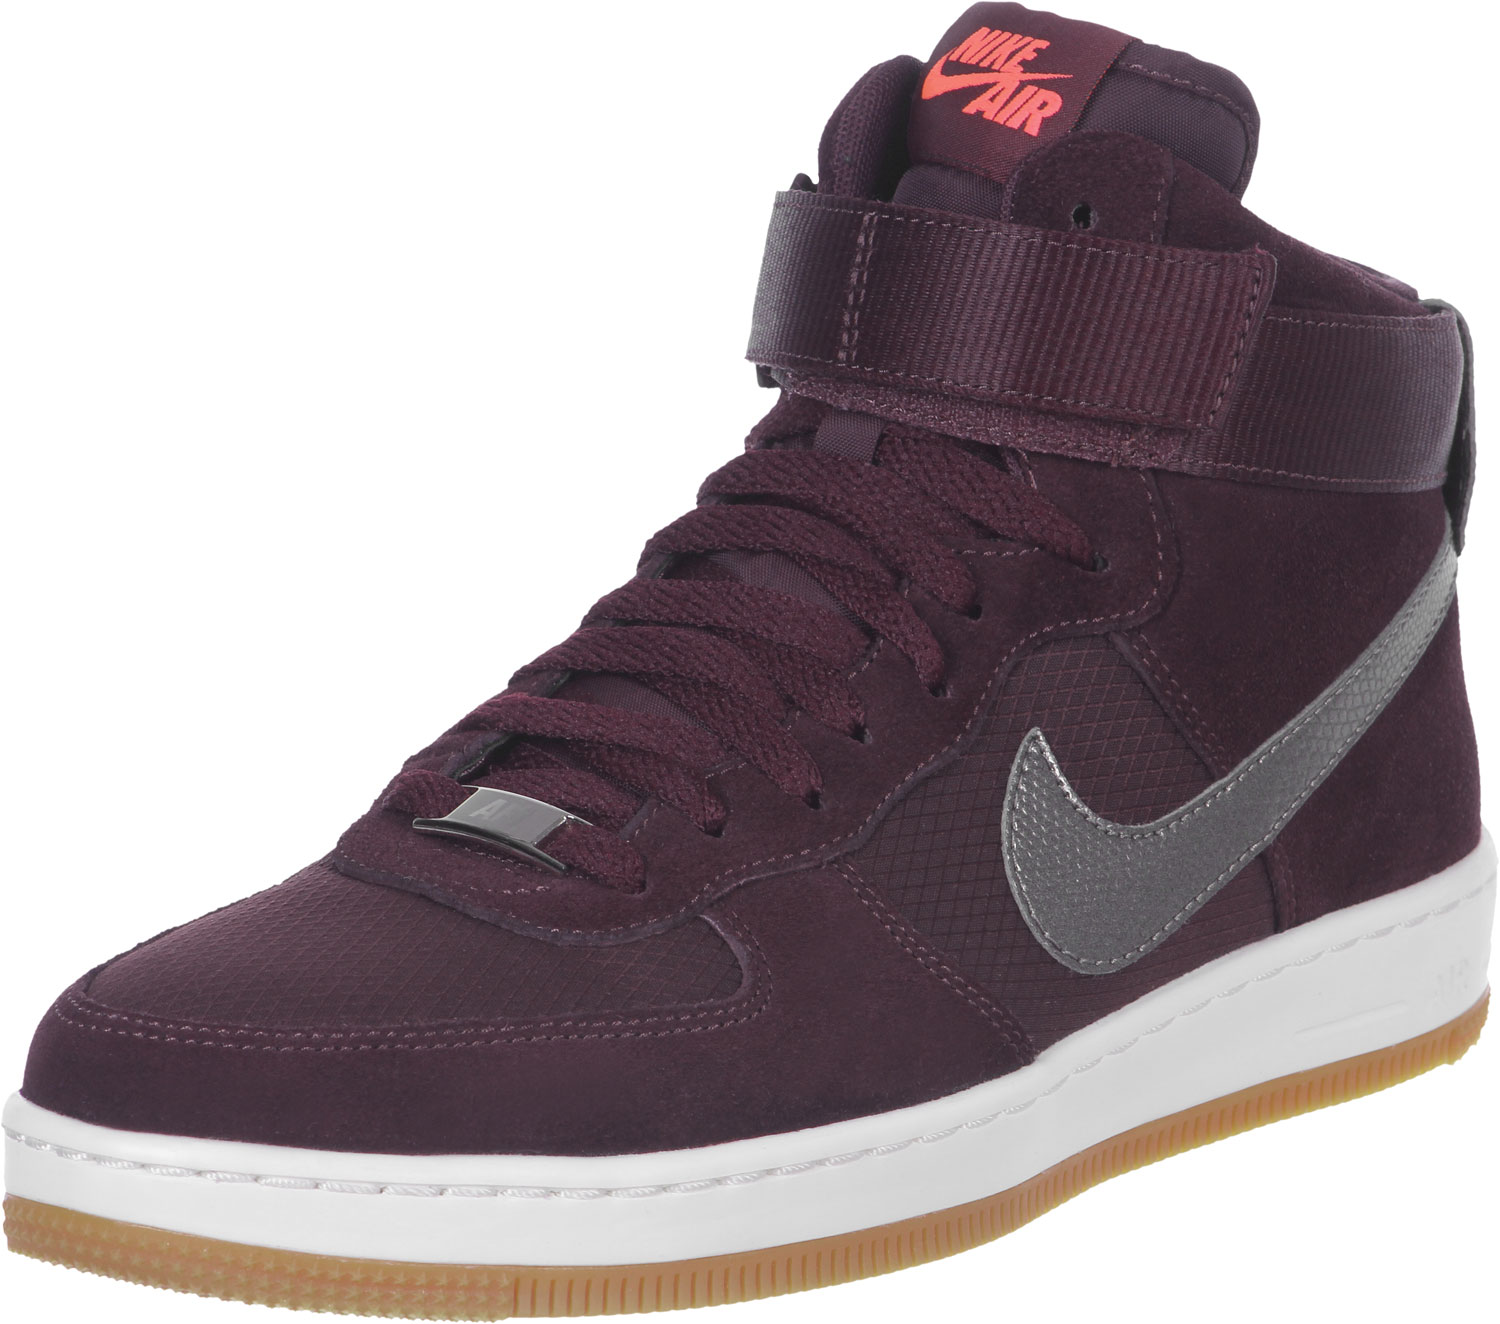 nike baskets air force 1 airness mid femme, nike air force 1 airness mid femme, Nike Air Force 1 Airness Mid W chaussures